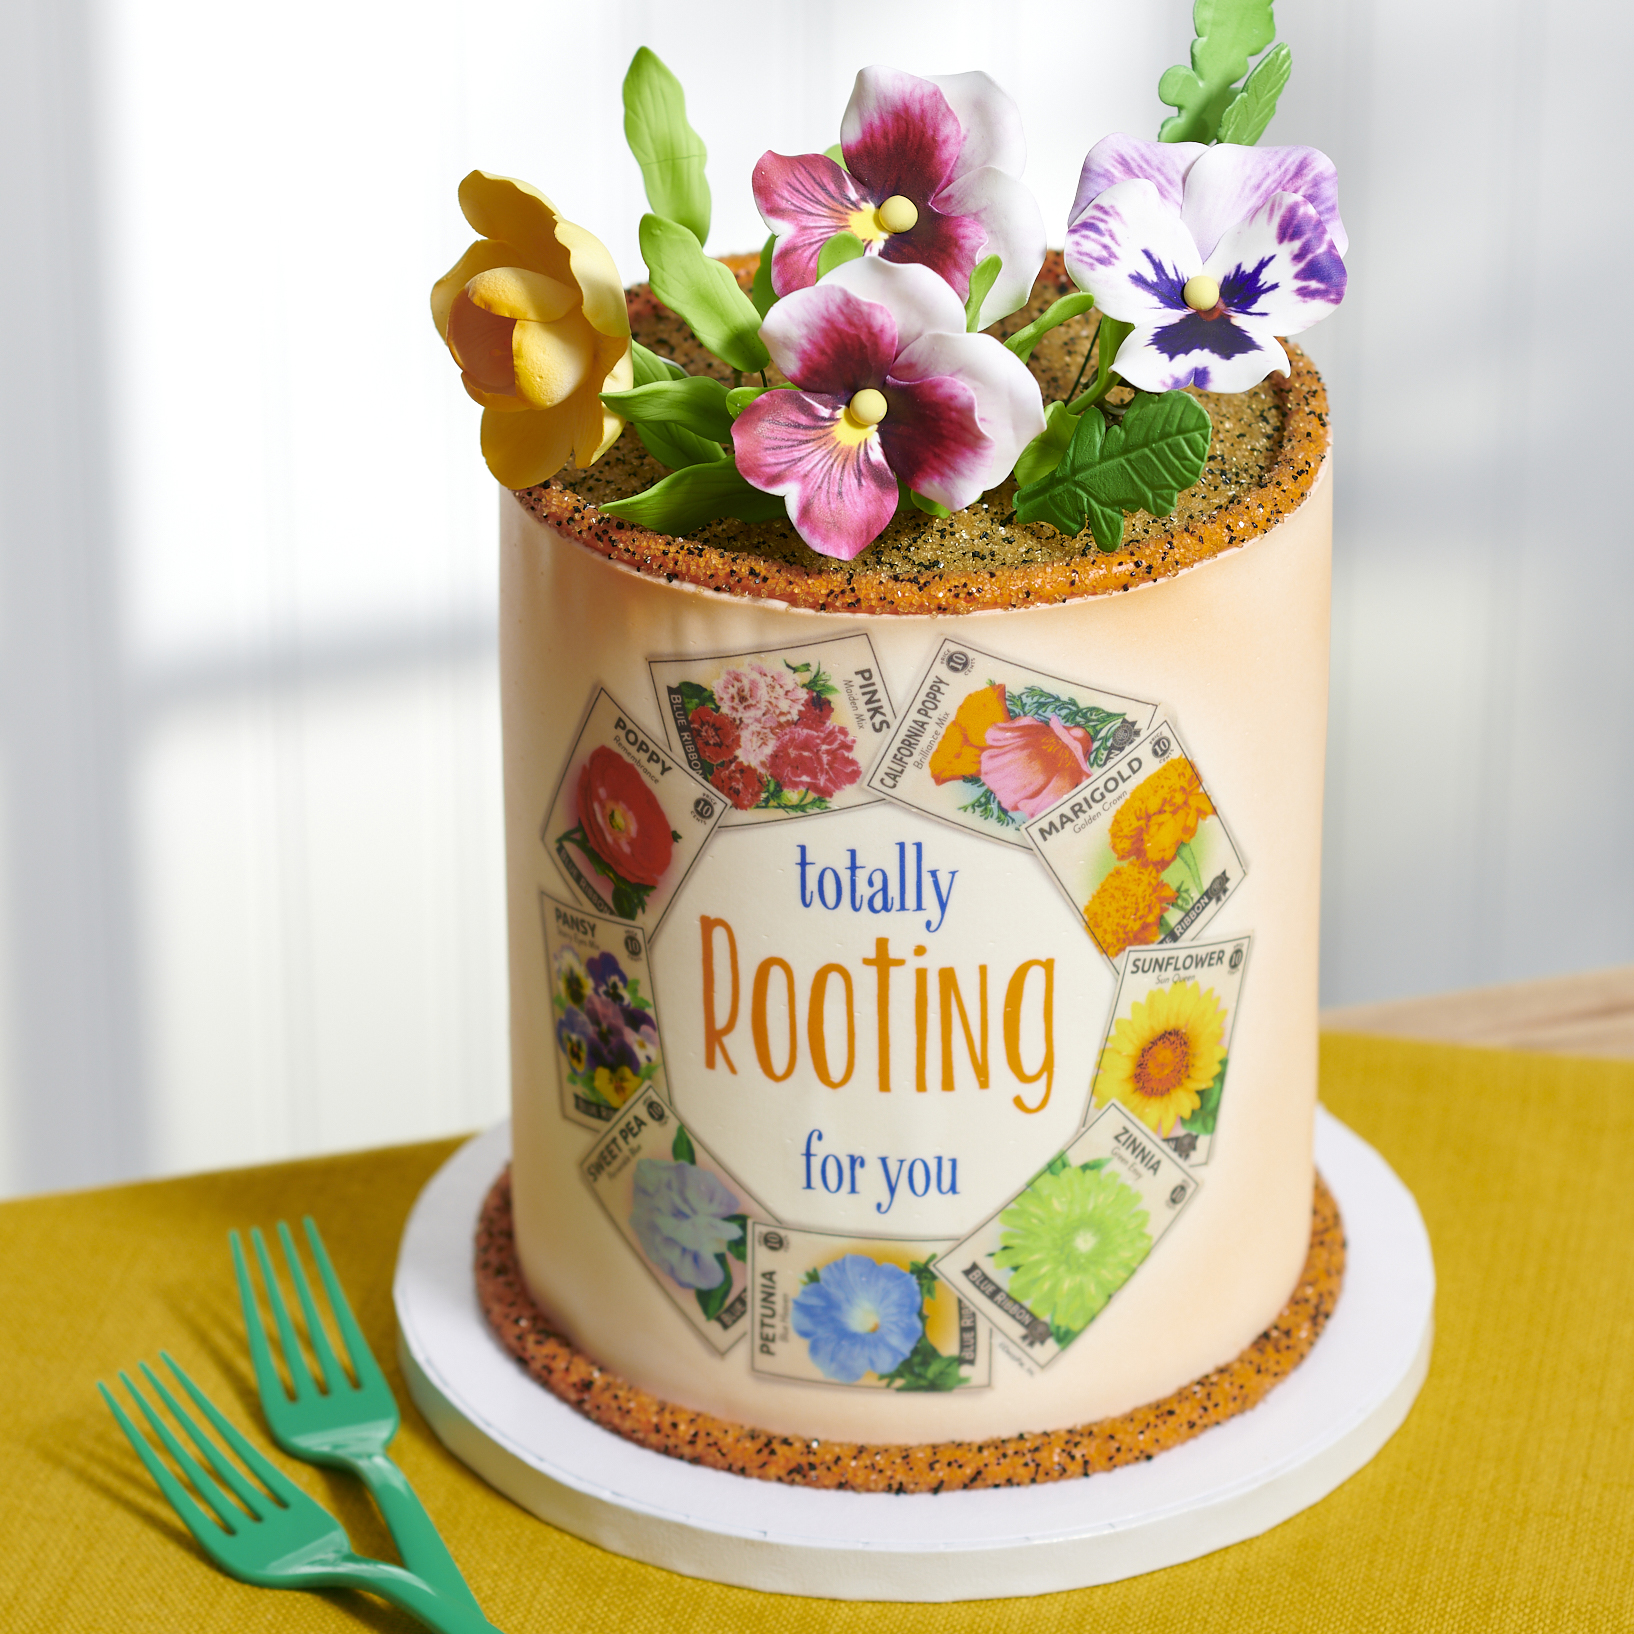 Totally rooting for you edible cake border for the garden fan borthday or even a great cake design for mother's day. Edible cake border with flower seed packets wrap around the cake